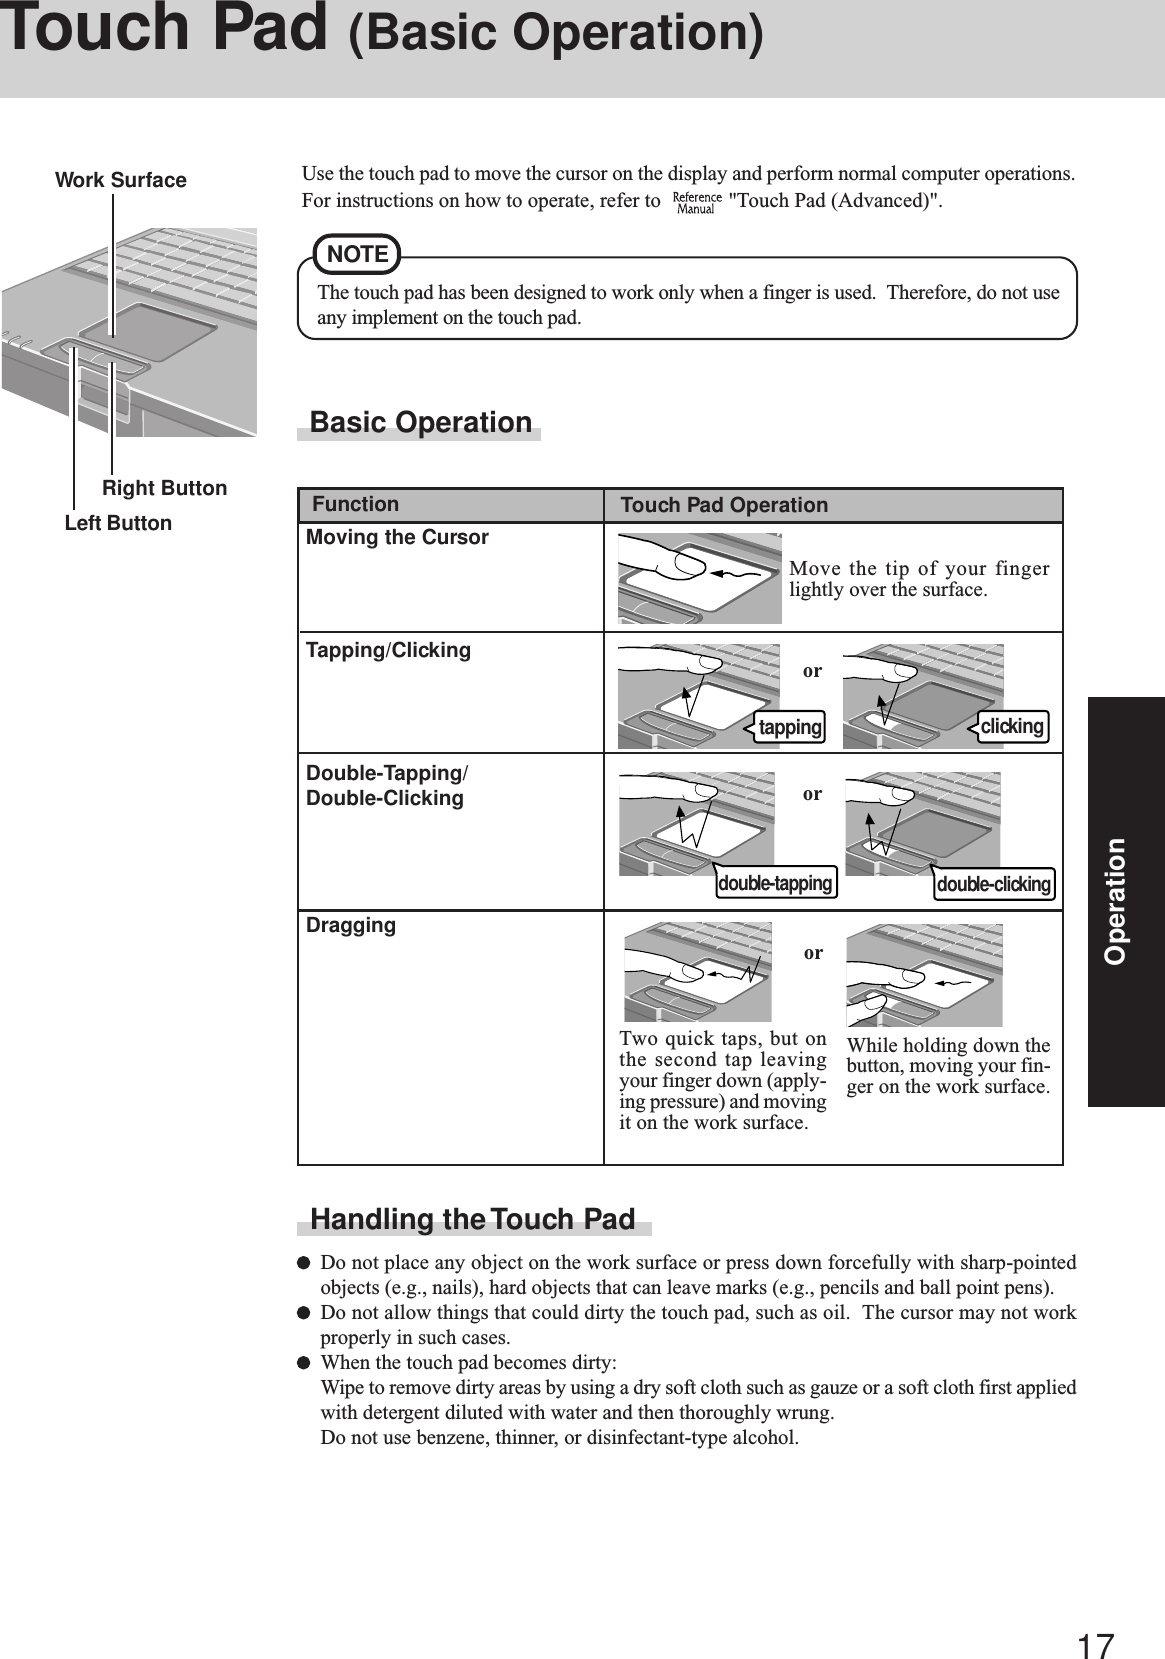 17OperationOperationTouch Pad (Basic Operation)Use the touch pad to move the cursor on the display and perform normal computer operations.For instructions on how to operate, refer to    &quot;Touch Pad (Advanced)&quot;.Handling the Touch PadDo not place any object on the work surface or press down forcefully with sharp-pointedobjects (e.g., nails), hard objects that can leave marks (e.g., pencils and ball point pens).Do not allow things that could dirty the touch pad, such as oil.  The cursor may not workproperly in such cases.When the touch pad becomes dirty:Wipe to remove dirty areas by using a dry soft cloth such as gauze or a soft cloth first appliedwith detergent diluted with water and then thoroughly wrung.Do not use benzene, thinner, or disinfectant-type alcohol.The touch pad has been designed to work only when a finger is used.  Therefore, do not useany implement on the touch pad.NOTEorTwo quick taps, but onthe second tap leavingyour finger down (apply-ing pressure) and movingit on the work surface.While holding down thebutton, moving your fin-ger on the work surface.orFunction Touch Pad OperationMoving the CursorTapping/ClickingDouble-Tapping/Double-ClickingDraggingorMove the tip of your fingerlightly over the surface.tapping clickingdouble-tappingBasic OperationLeft ButtonRight ButtonWork Surfacedouble-clicking